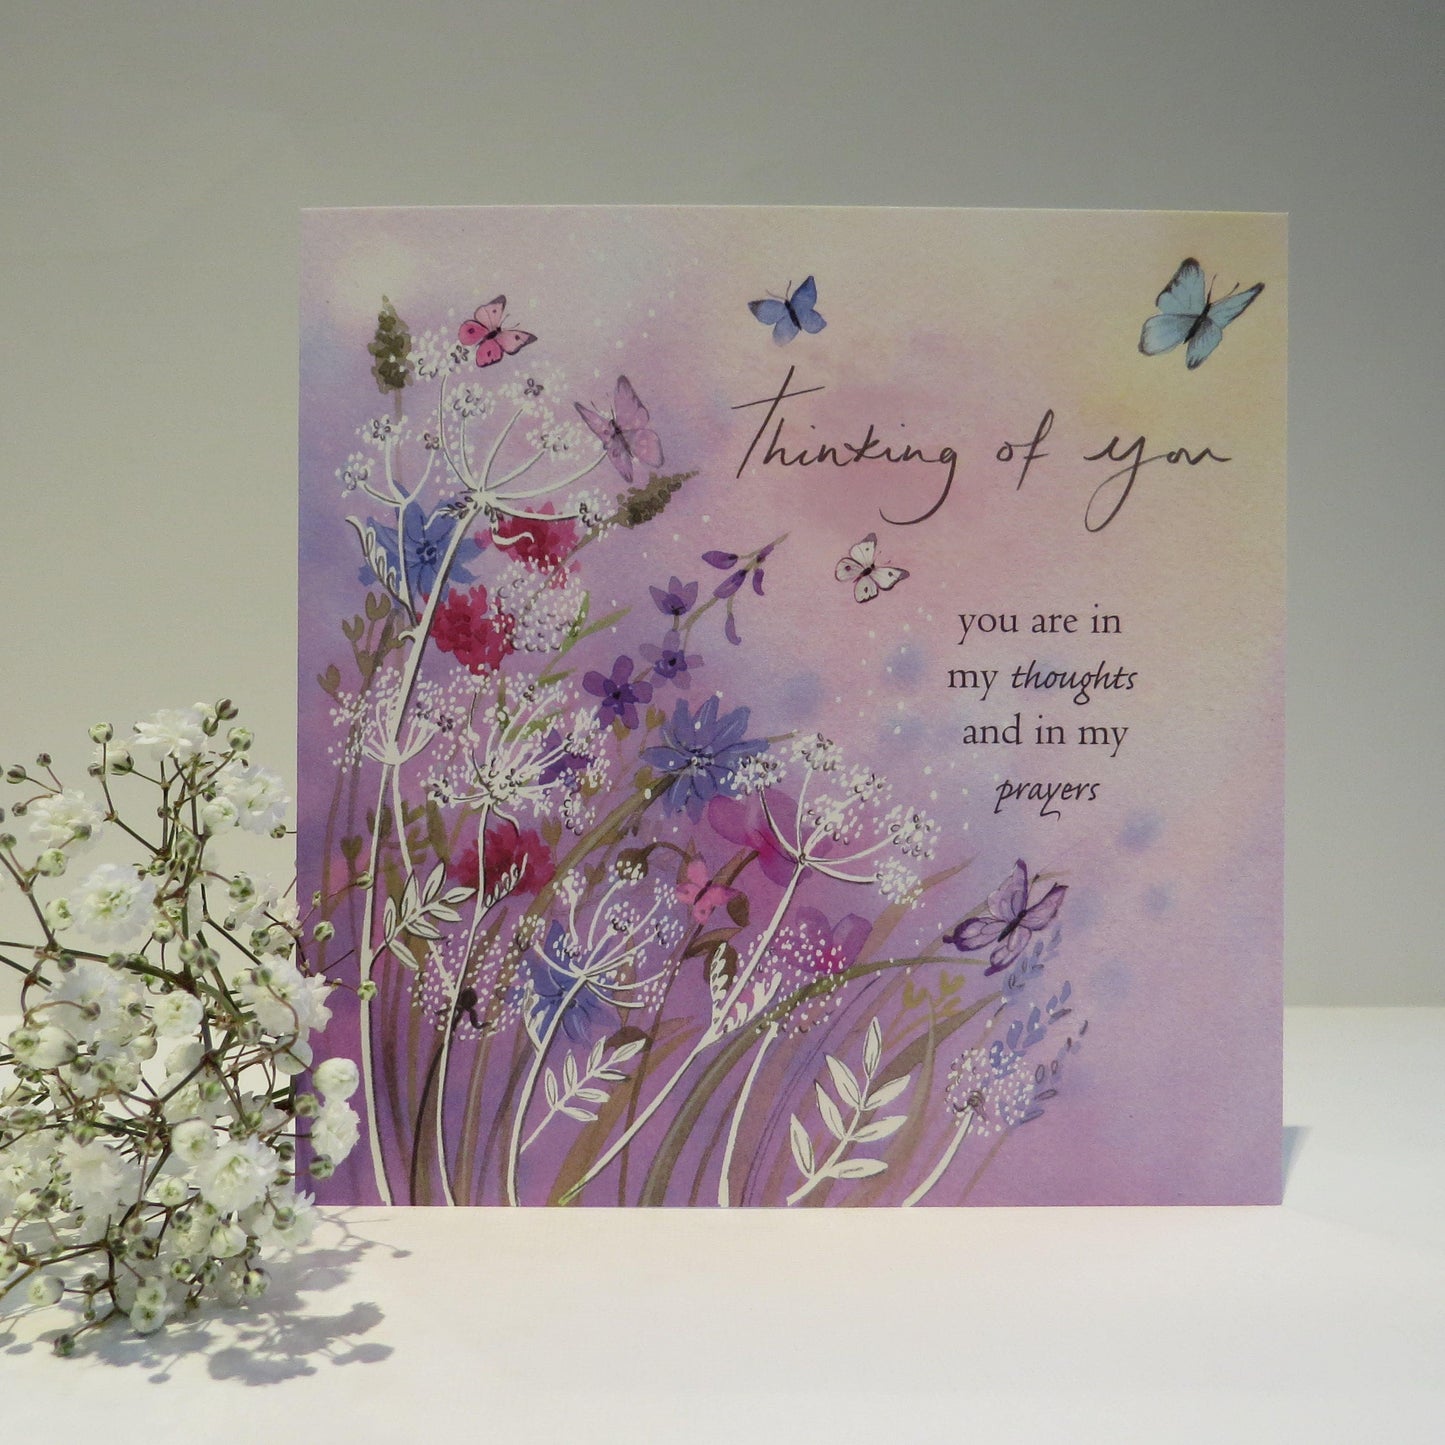 Meadow Thinking of You Card